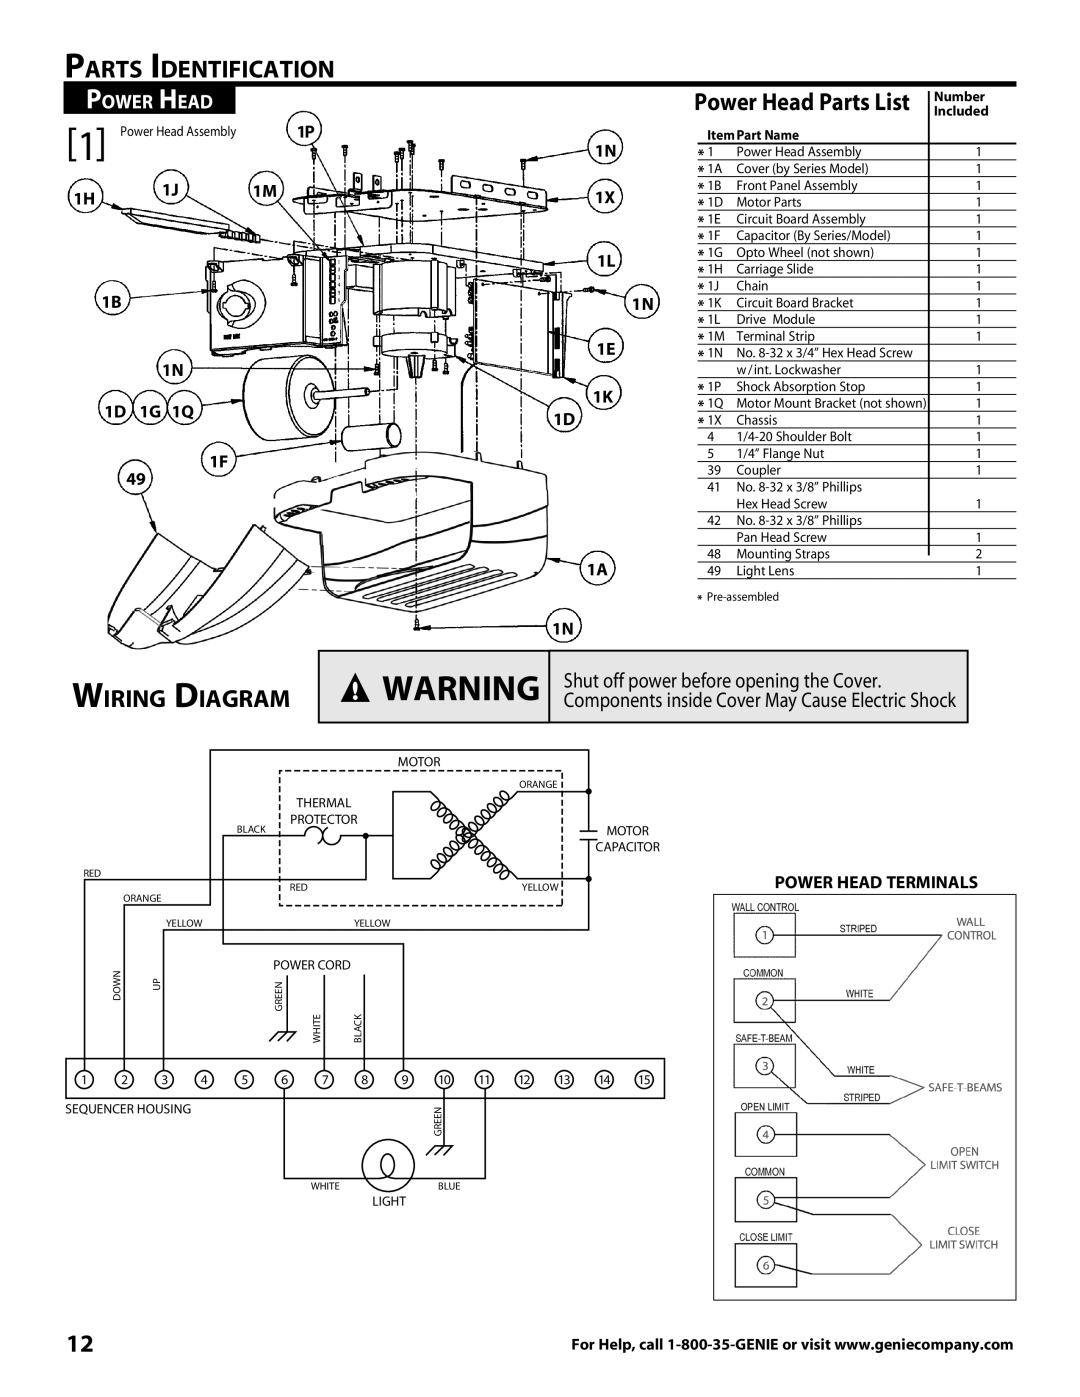 Genie 3681036666 Parts Identification, Wiring Diagram, Power Head Parts List, Shut off power before opening the Cover 